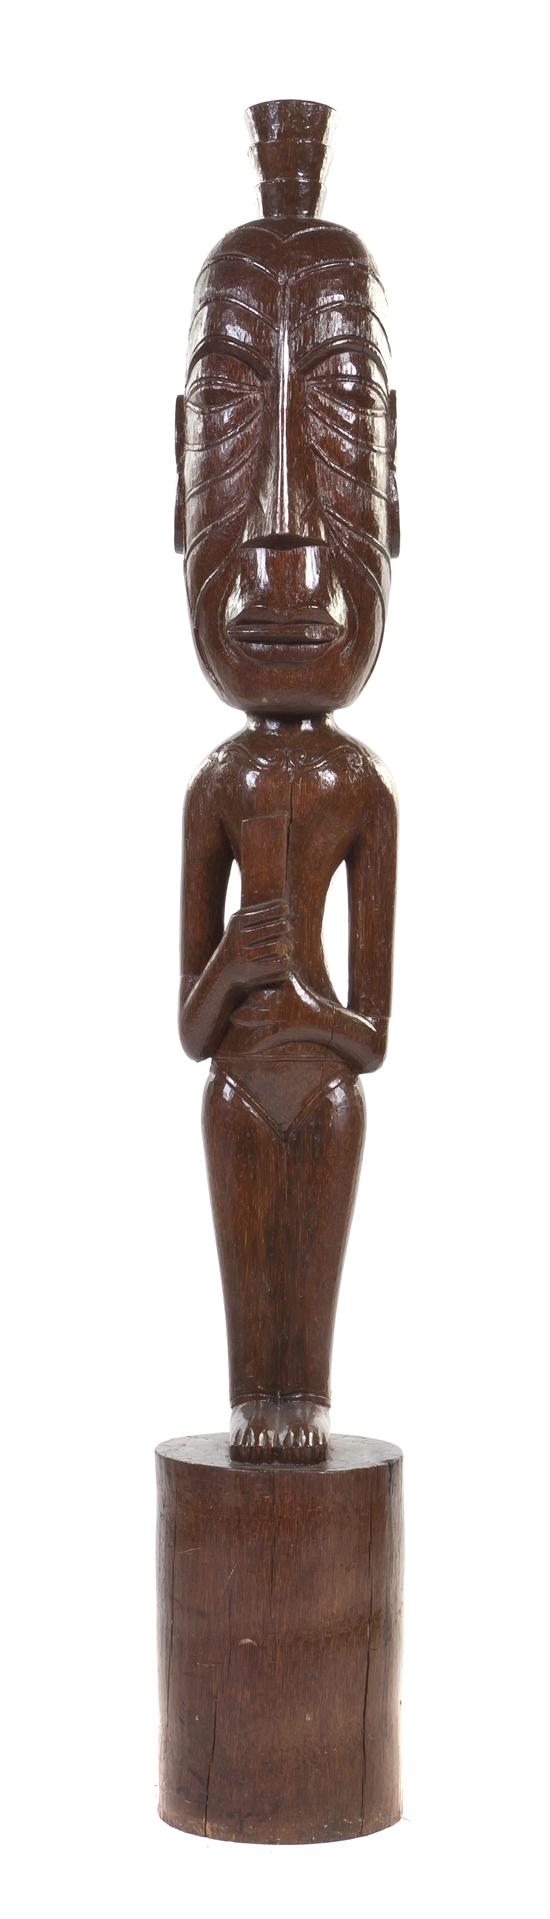 A Carved Wood Tiki depicted standing 1554b4